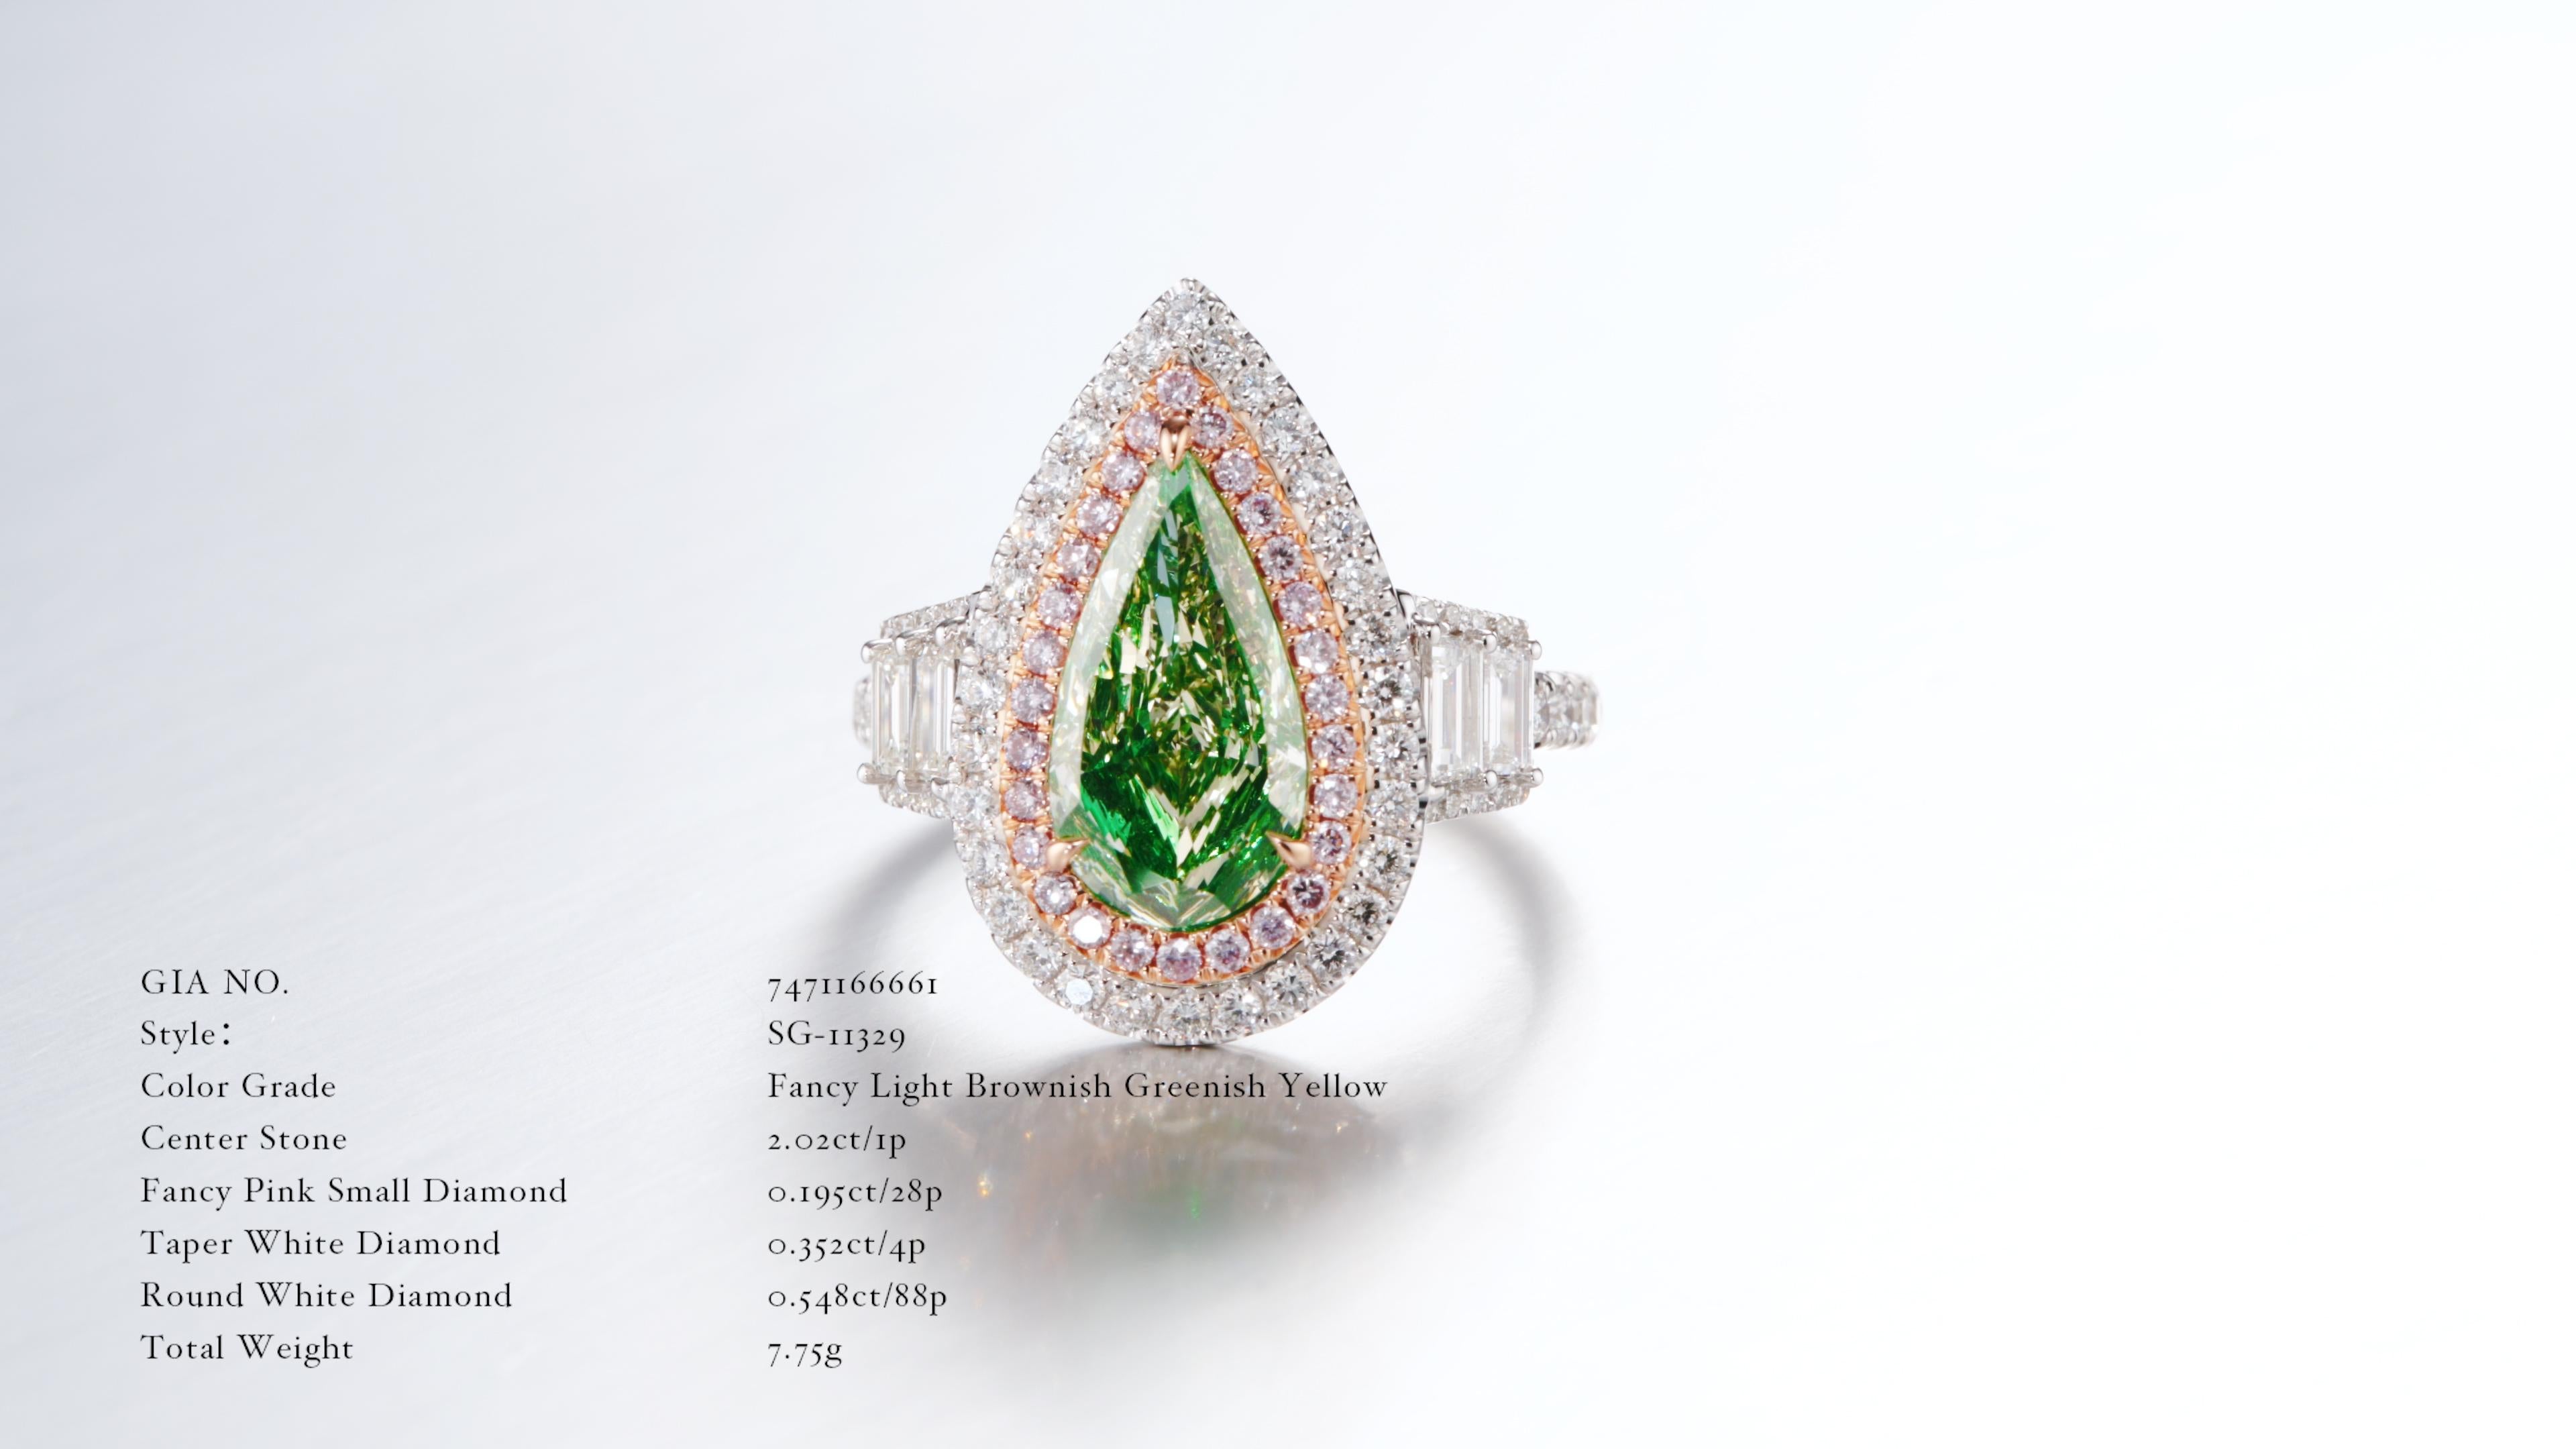 2.03-carat Fancy Light Brownish Greenish Yellow GIA Certified Pear Shape Diamond Ring – a true masterpiece that exudes elegance and uniqueness. The captivating pear-shaped center diamond, certified by GIA for its exceptional quality, takes center